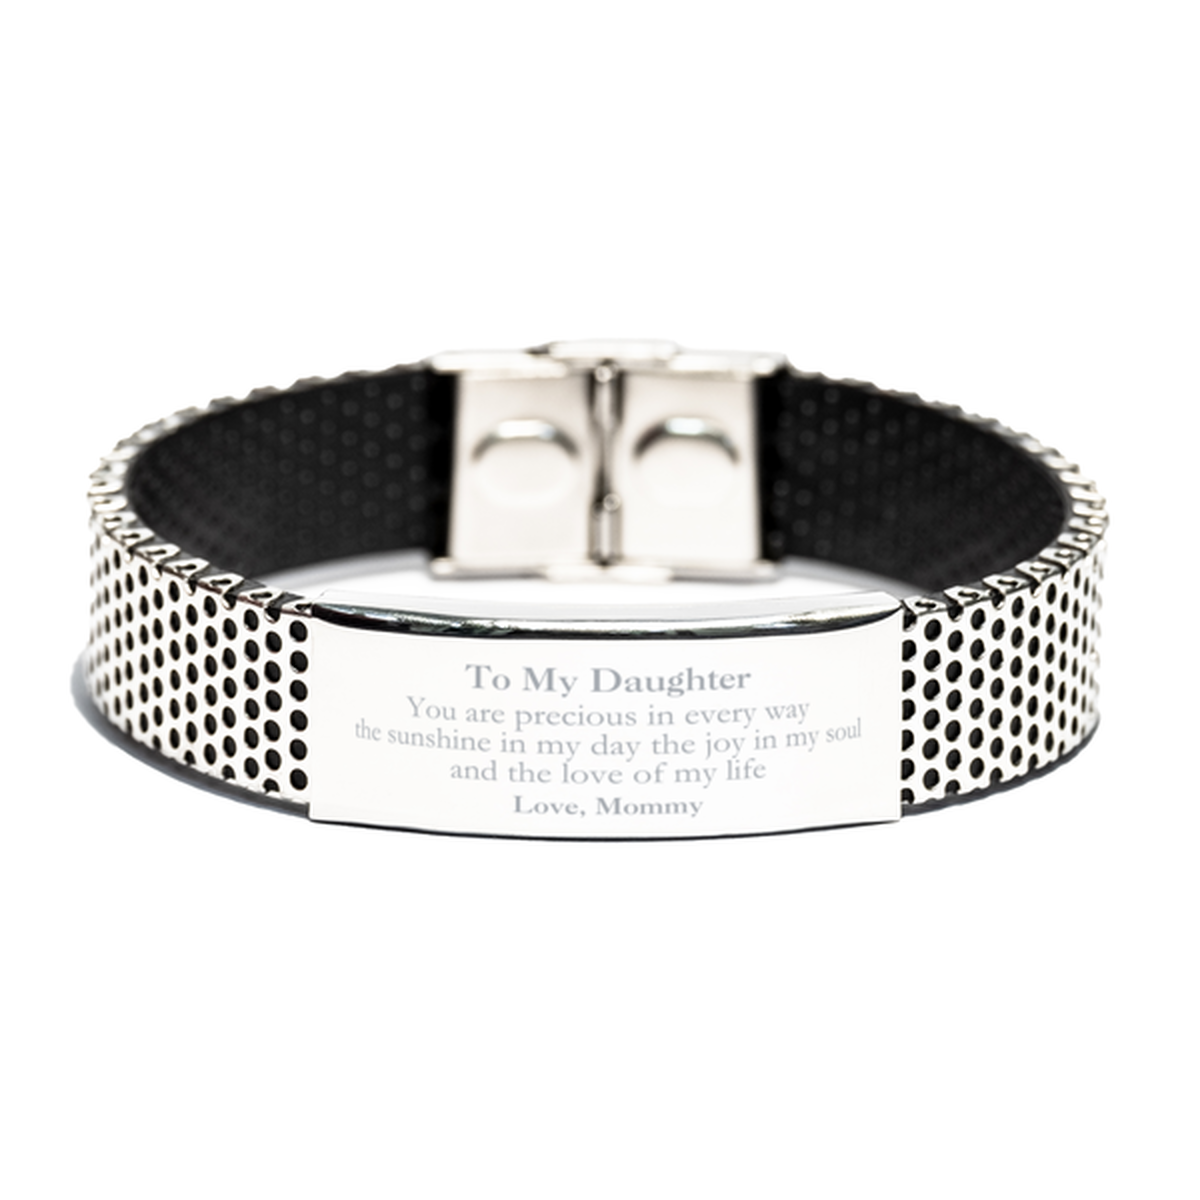 Graduation Gifts for Daughter Stainless Steel Bracelet Present from Mommy, Christmas Daughter Birthday Gifts Daughter You are precious in every way the sunshine in my day. Love, Mommy